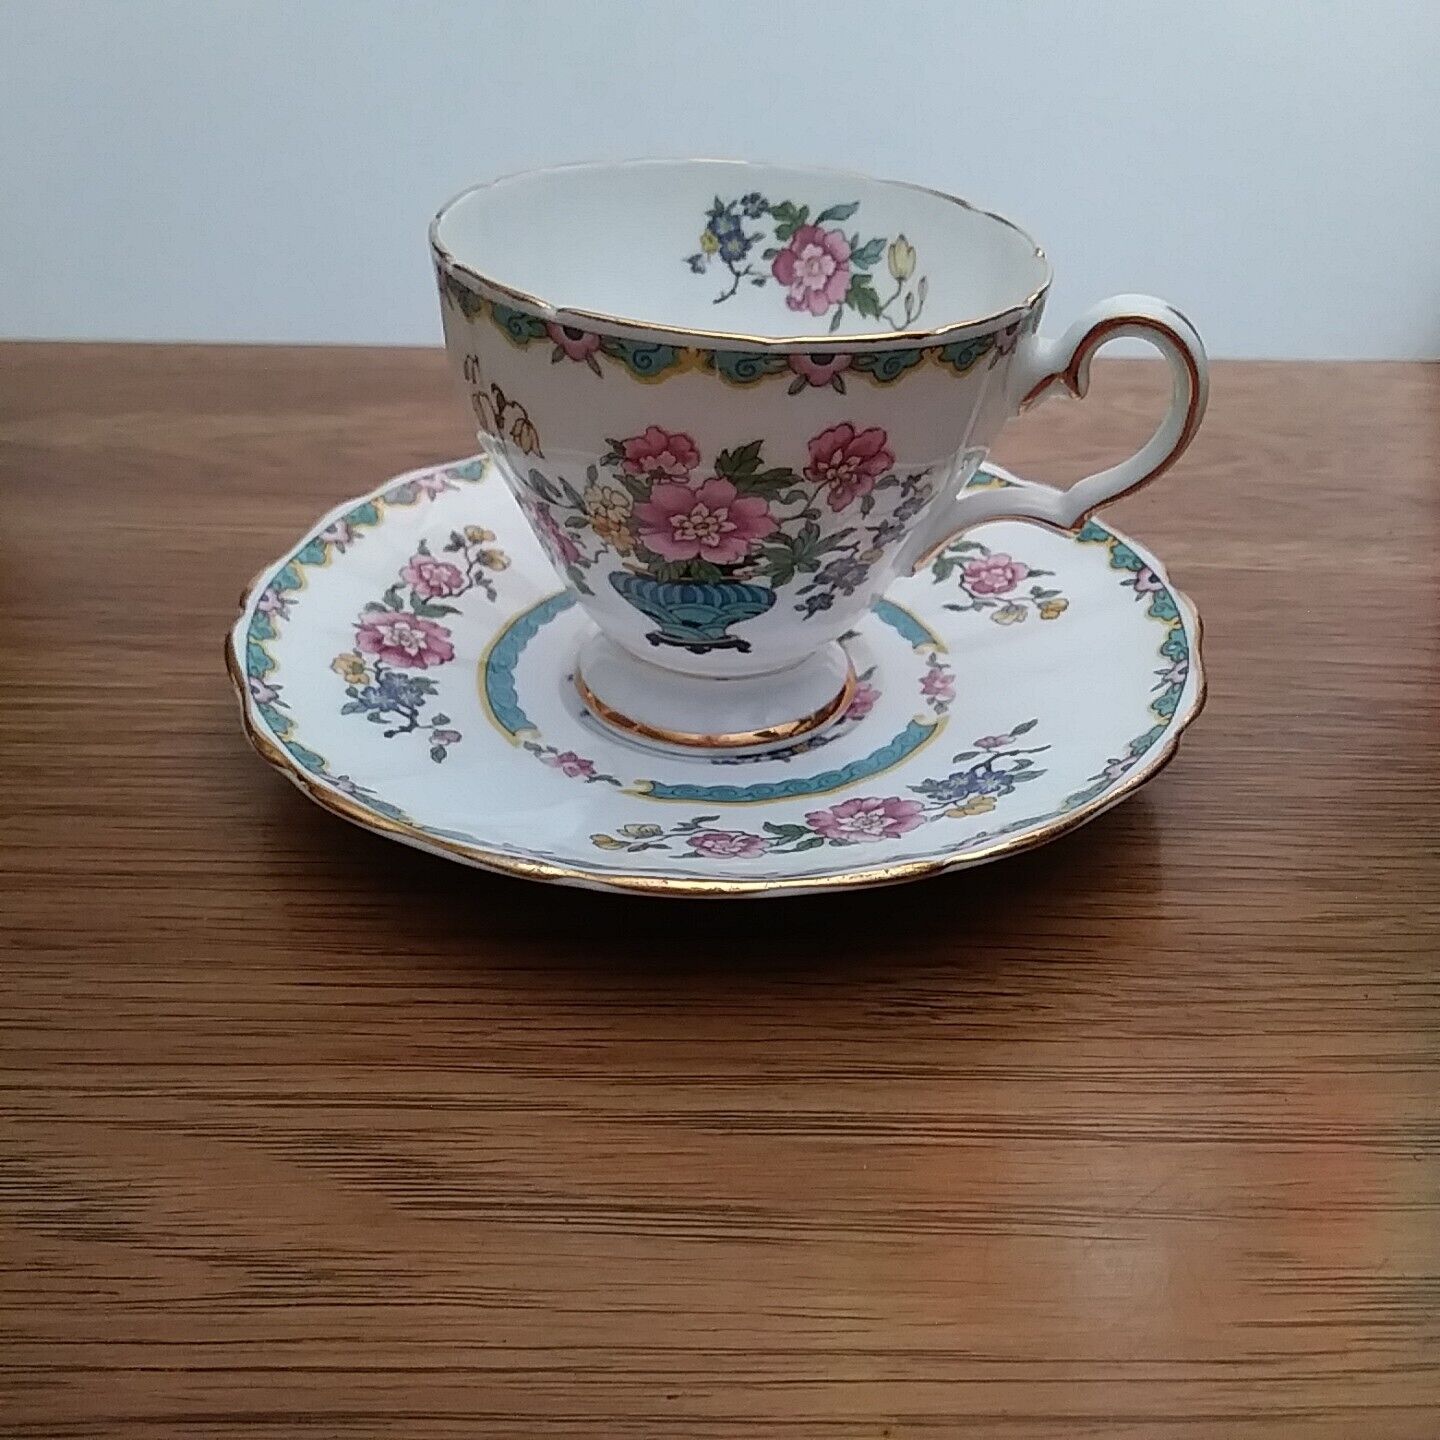 Vintage Grosvenor china made in England Teacup & Saucer “Wu Ting”